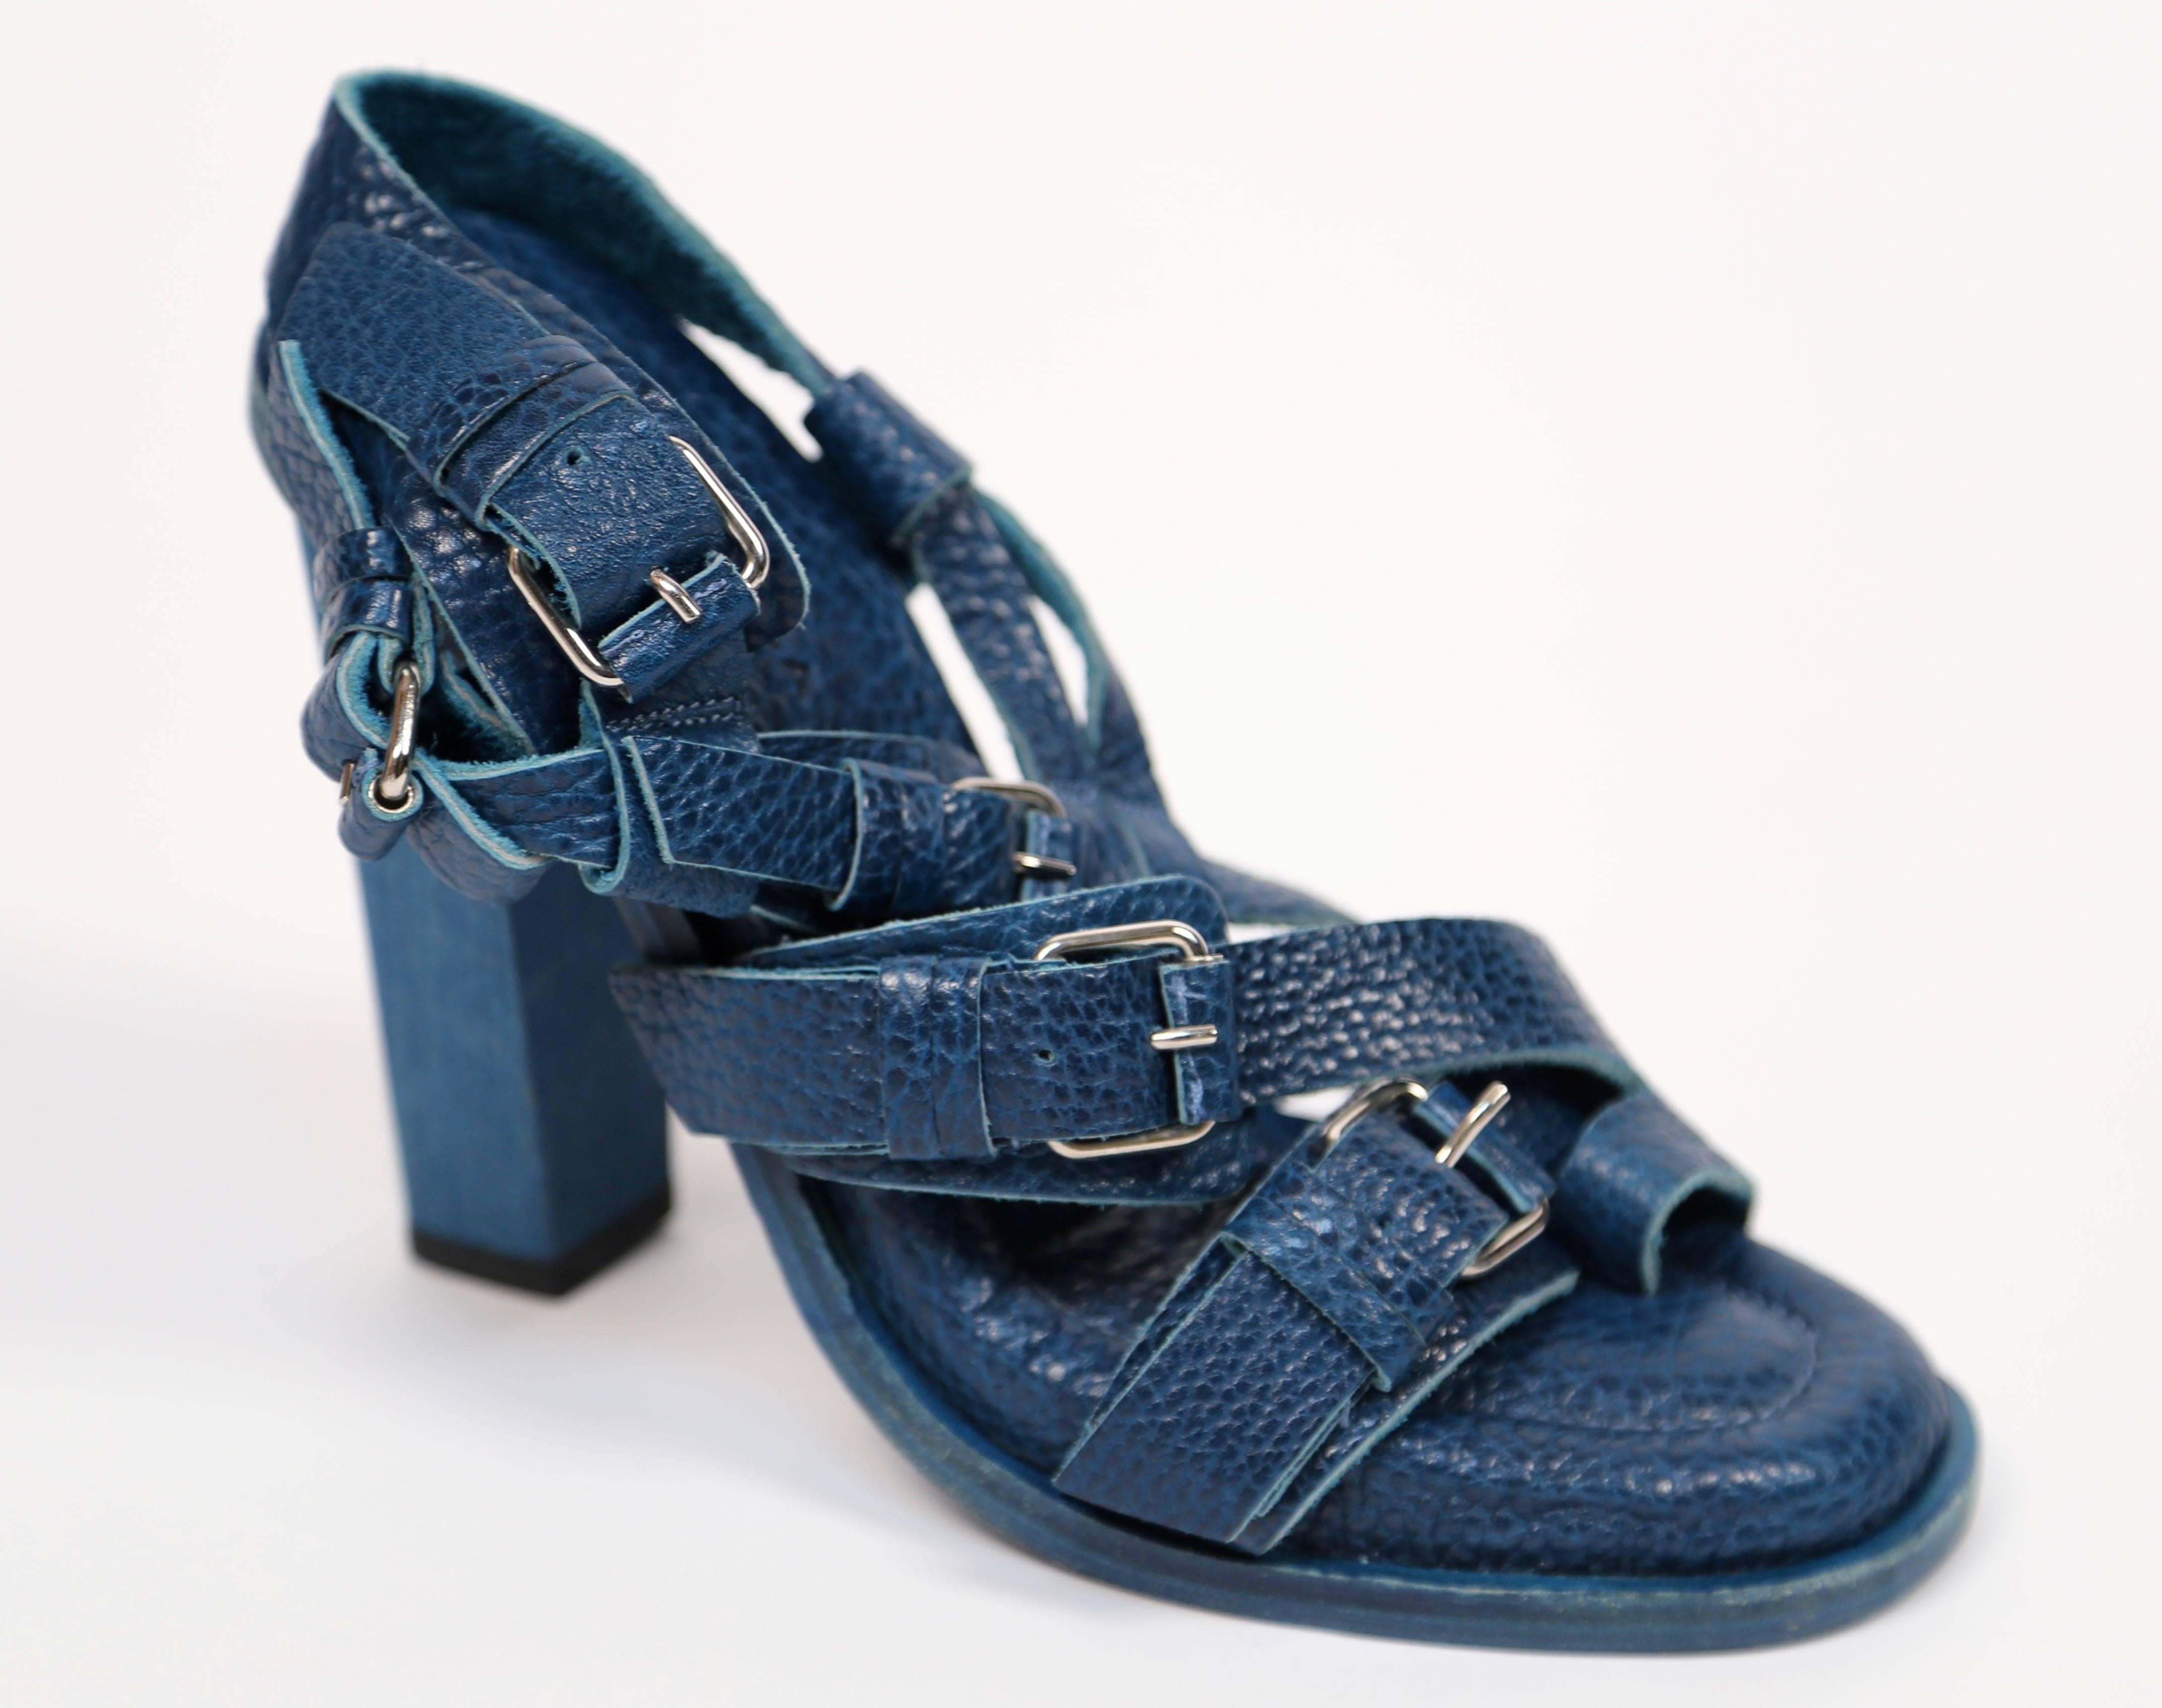 Turquoise leather sandals with silver buckles as featured on every model for spring 2003 Balenciaga show. Designed by Nicolas Ghesquière. French size 36. Insoles measures approximately 9.25